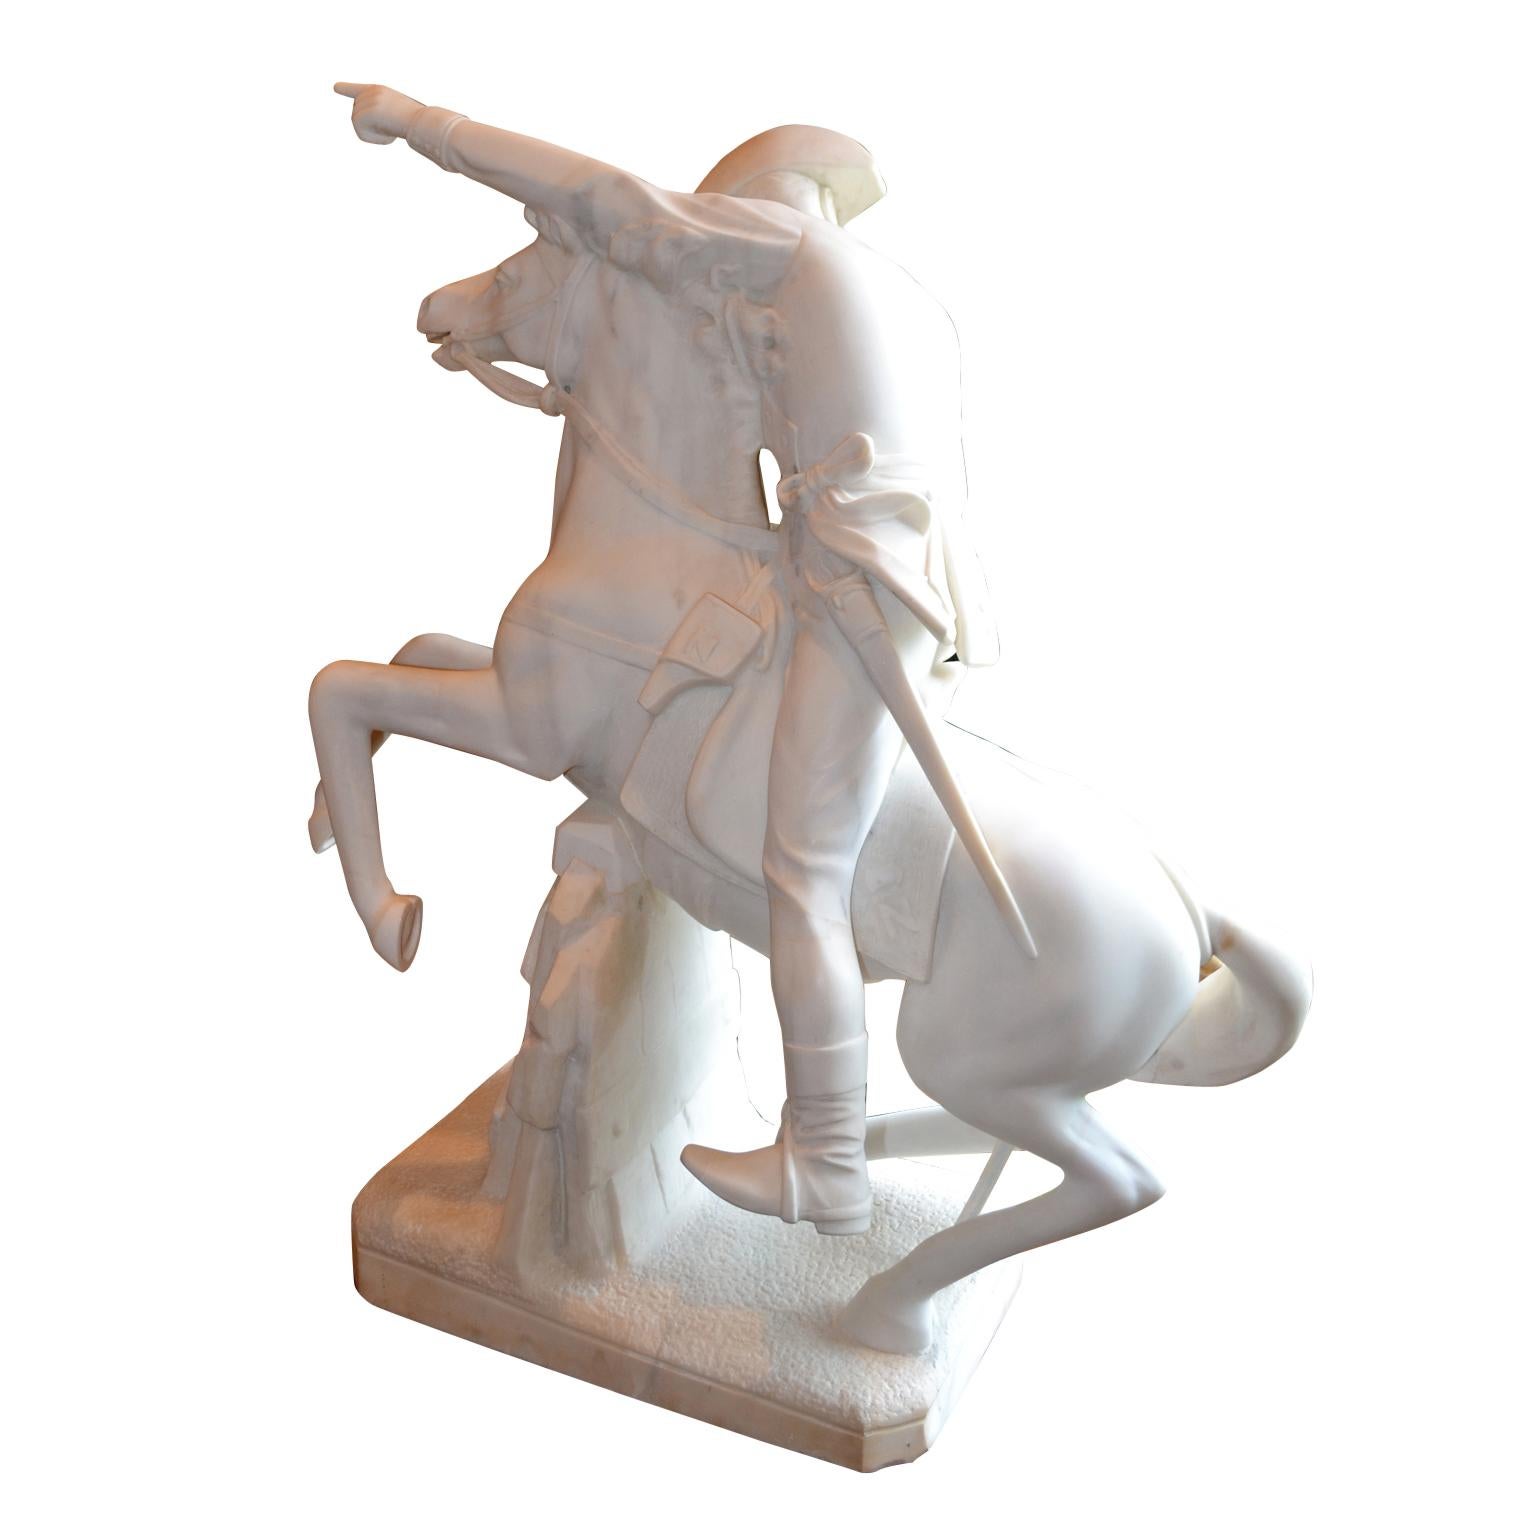 A rare late 19th century marble statue of Napoleon on horseback crossing the Alps (also known as Napoleon at the Saint-Bernard Pass or Bonaparte Crossing the Alps) after the famous painting by Jacques Louis David in 1801, now displayed in the Louvre